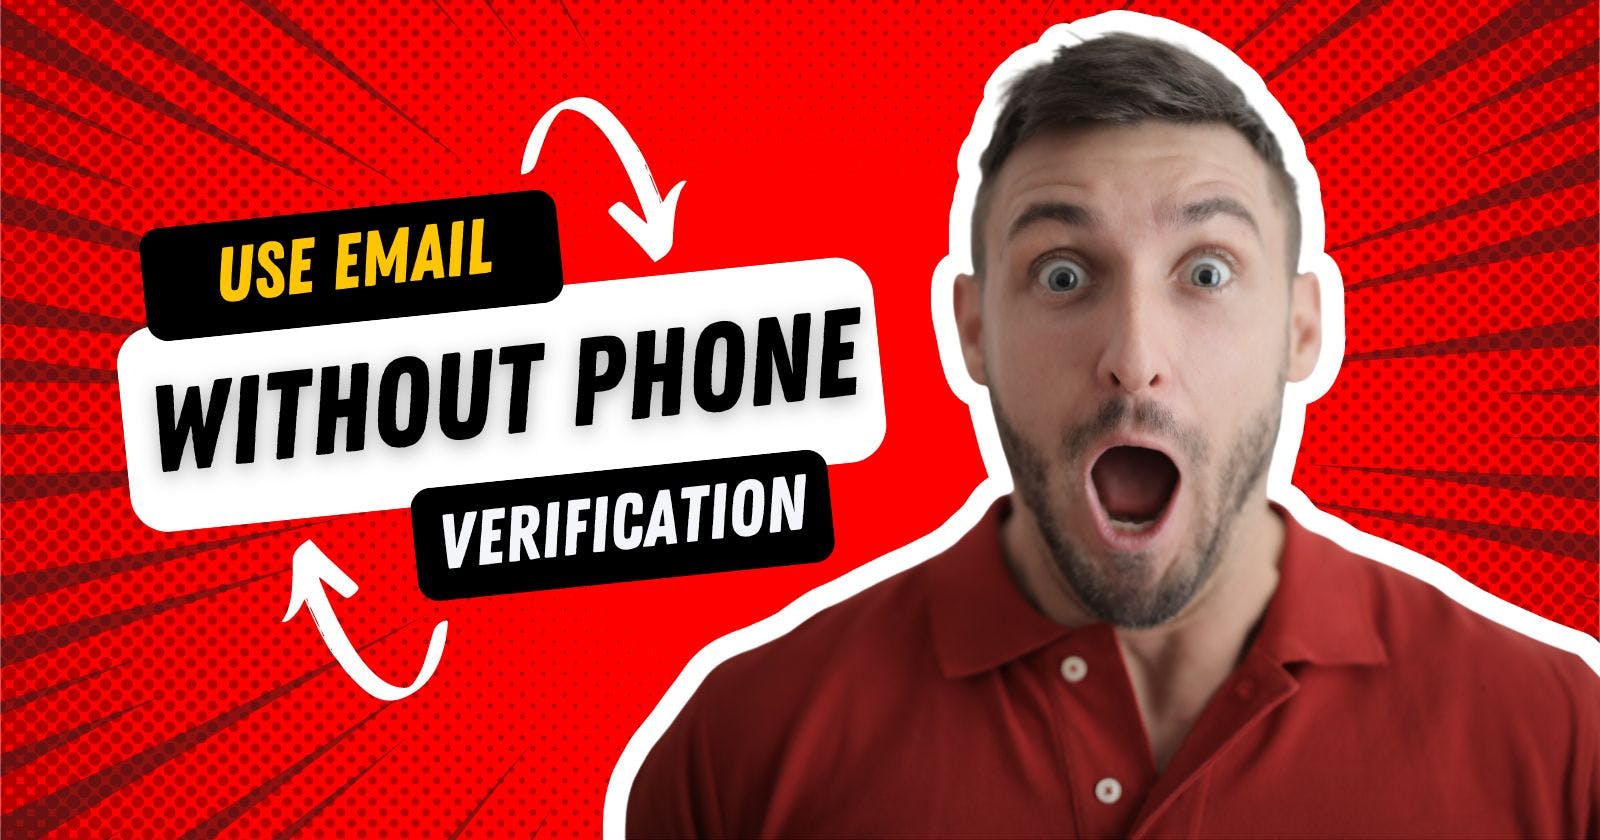 The Best Methods for Using Email Without Phone Verification